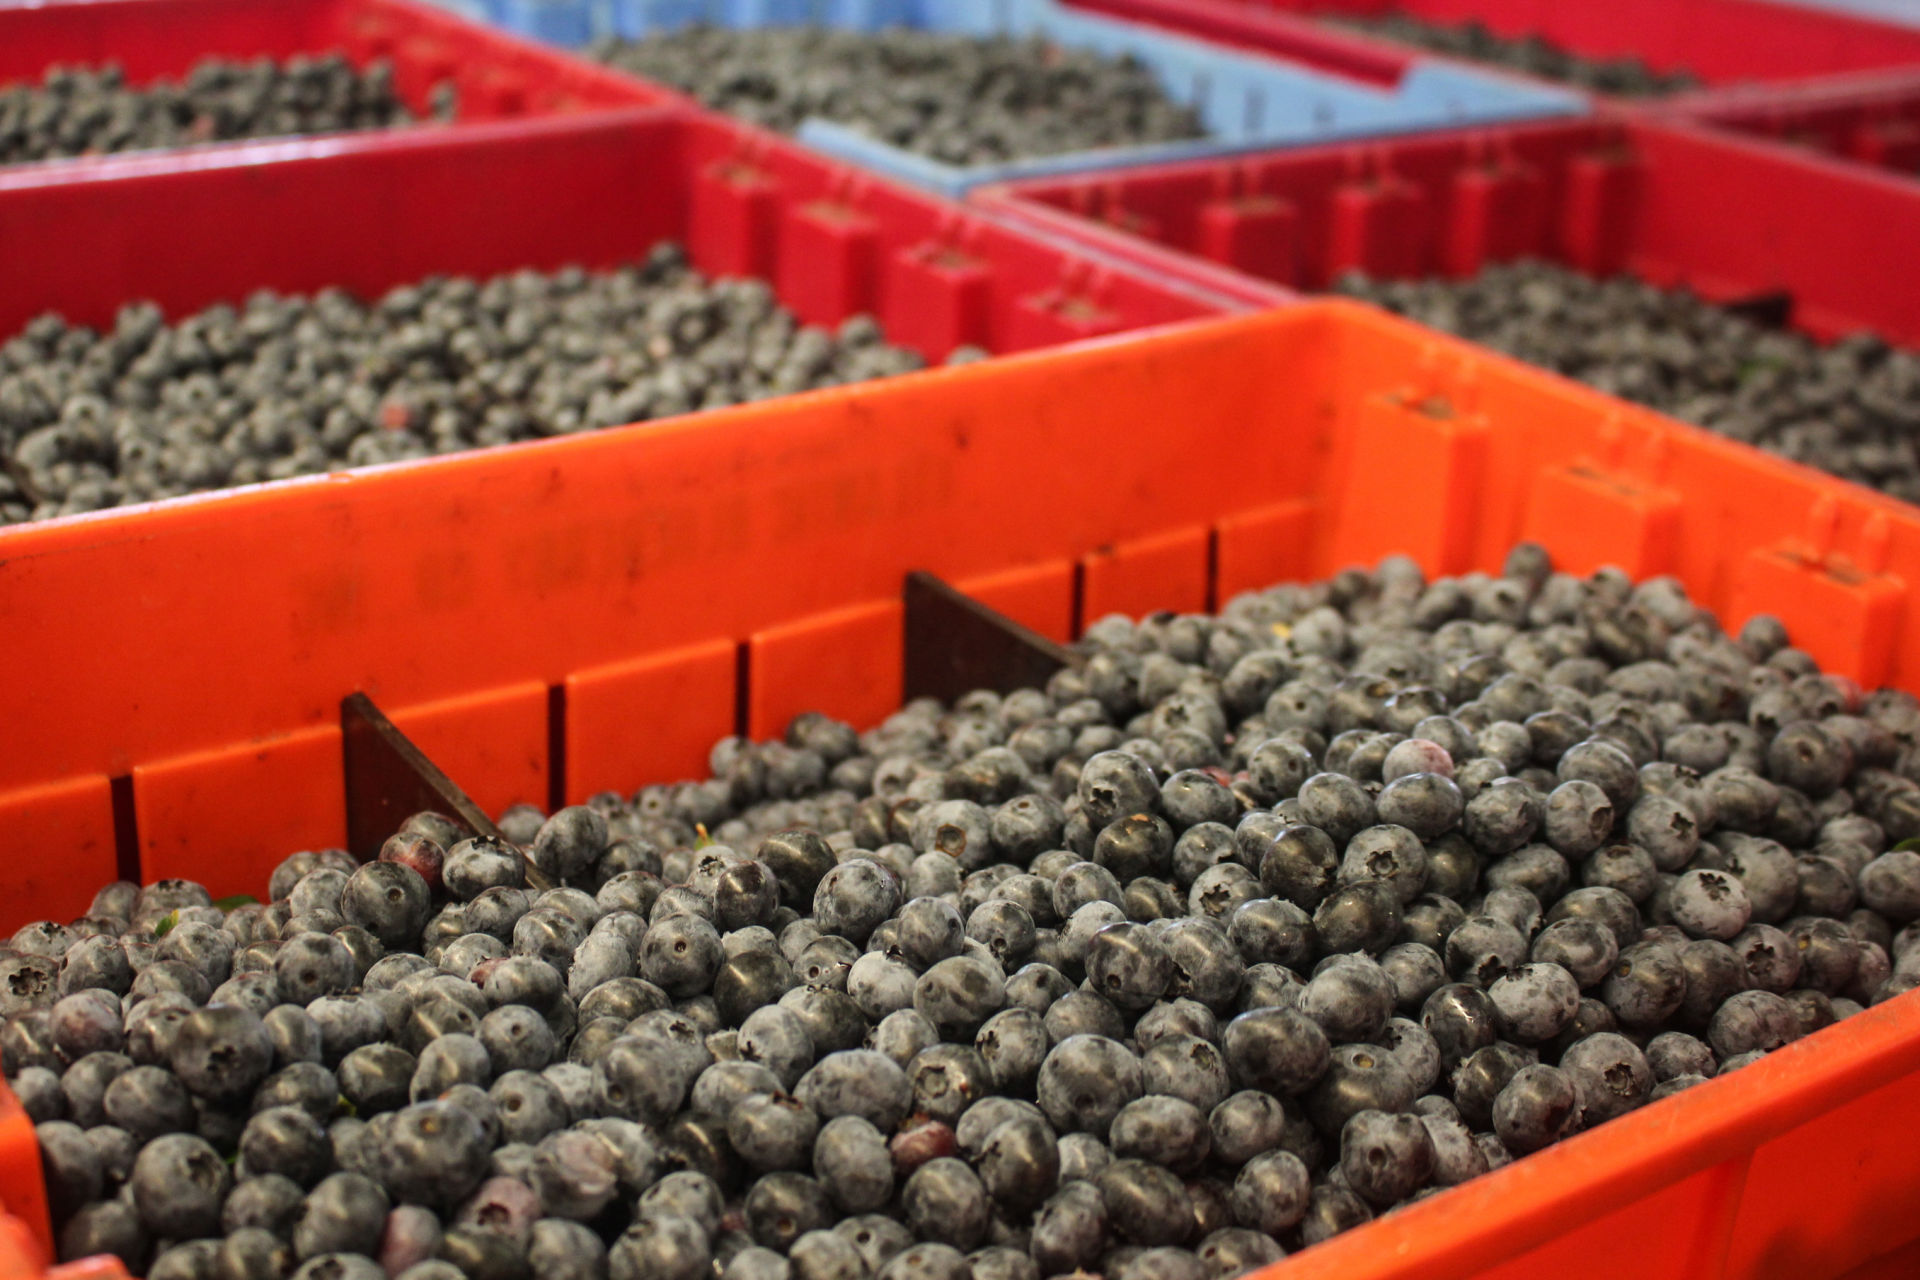 Blueberries wait for processing at the Atlantic Blueberry Co. packing facility in Hammonton, N.J.